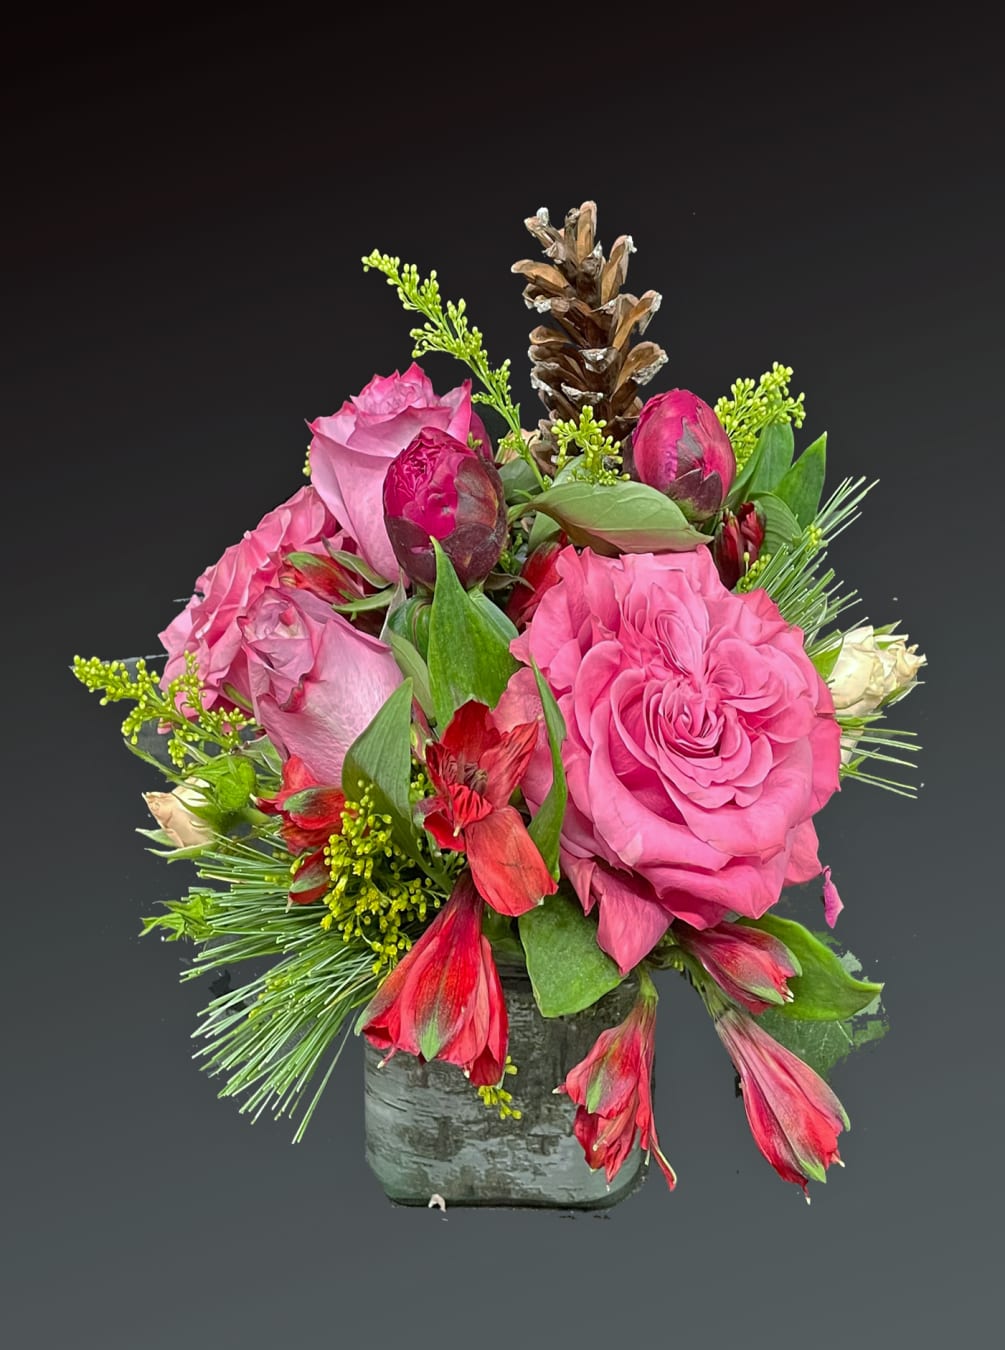 For this special bundle of garden roses we choose the color you